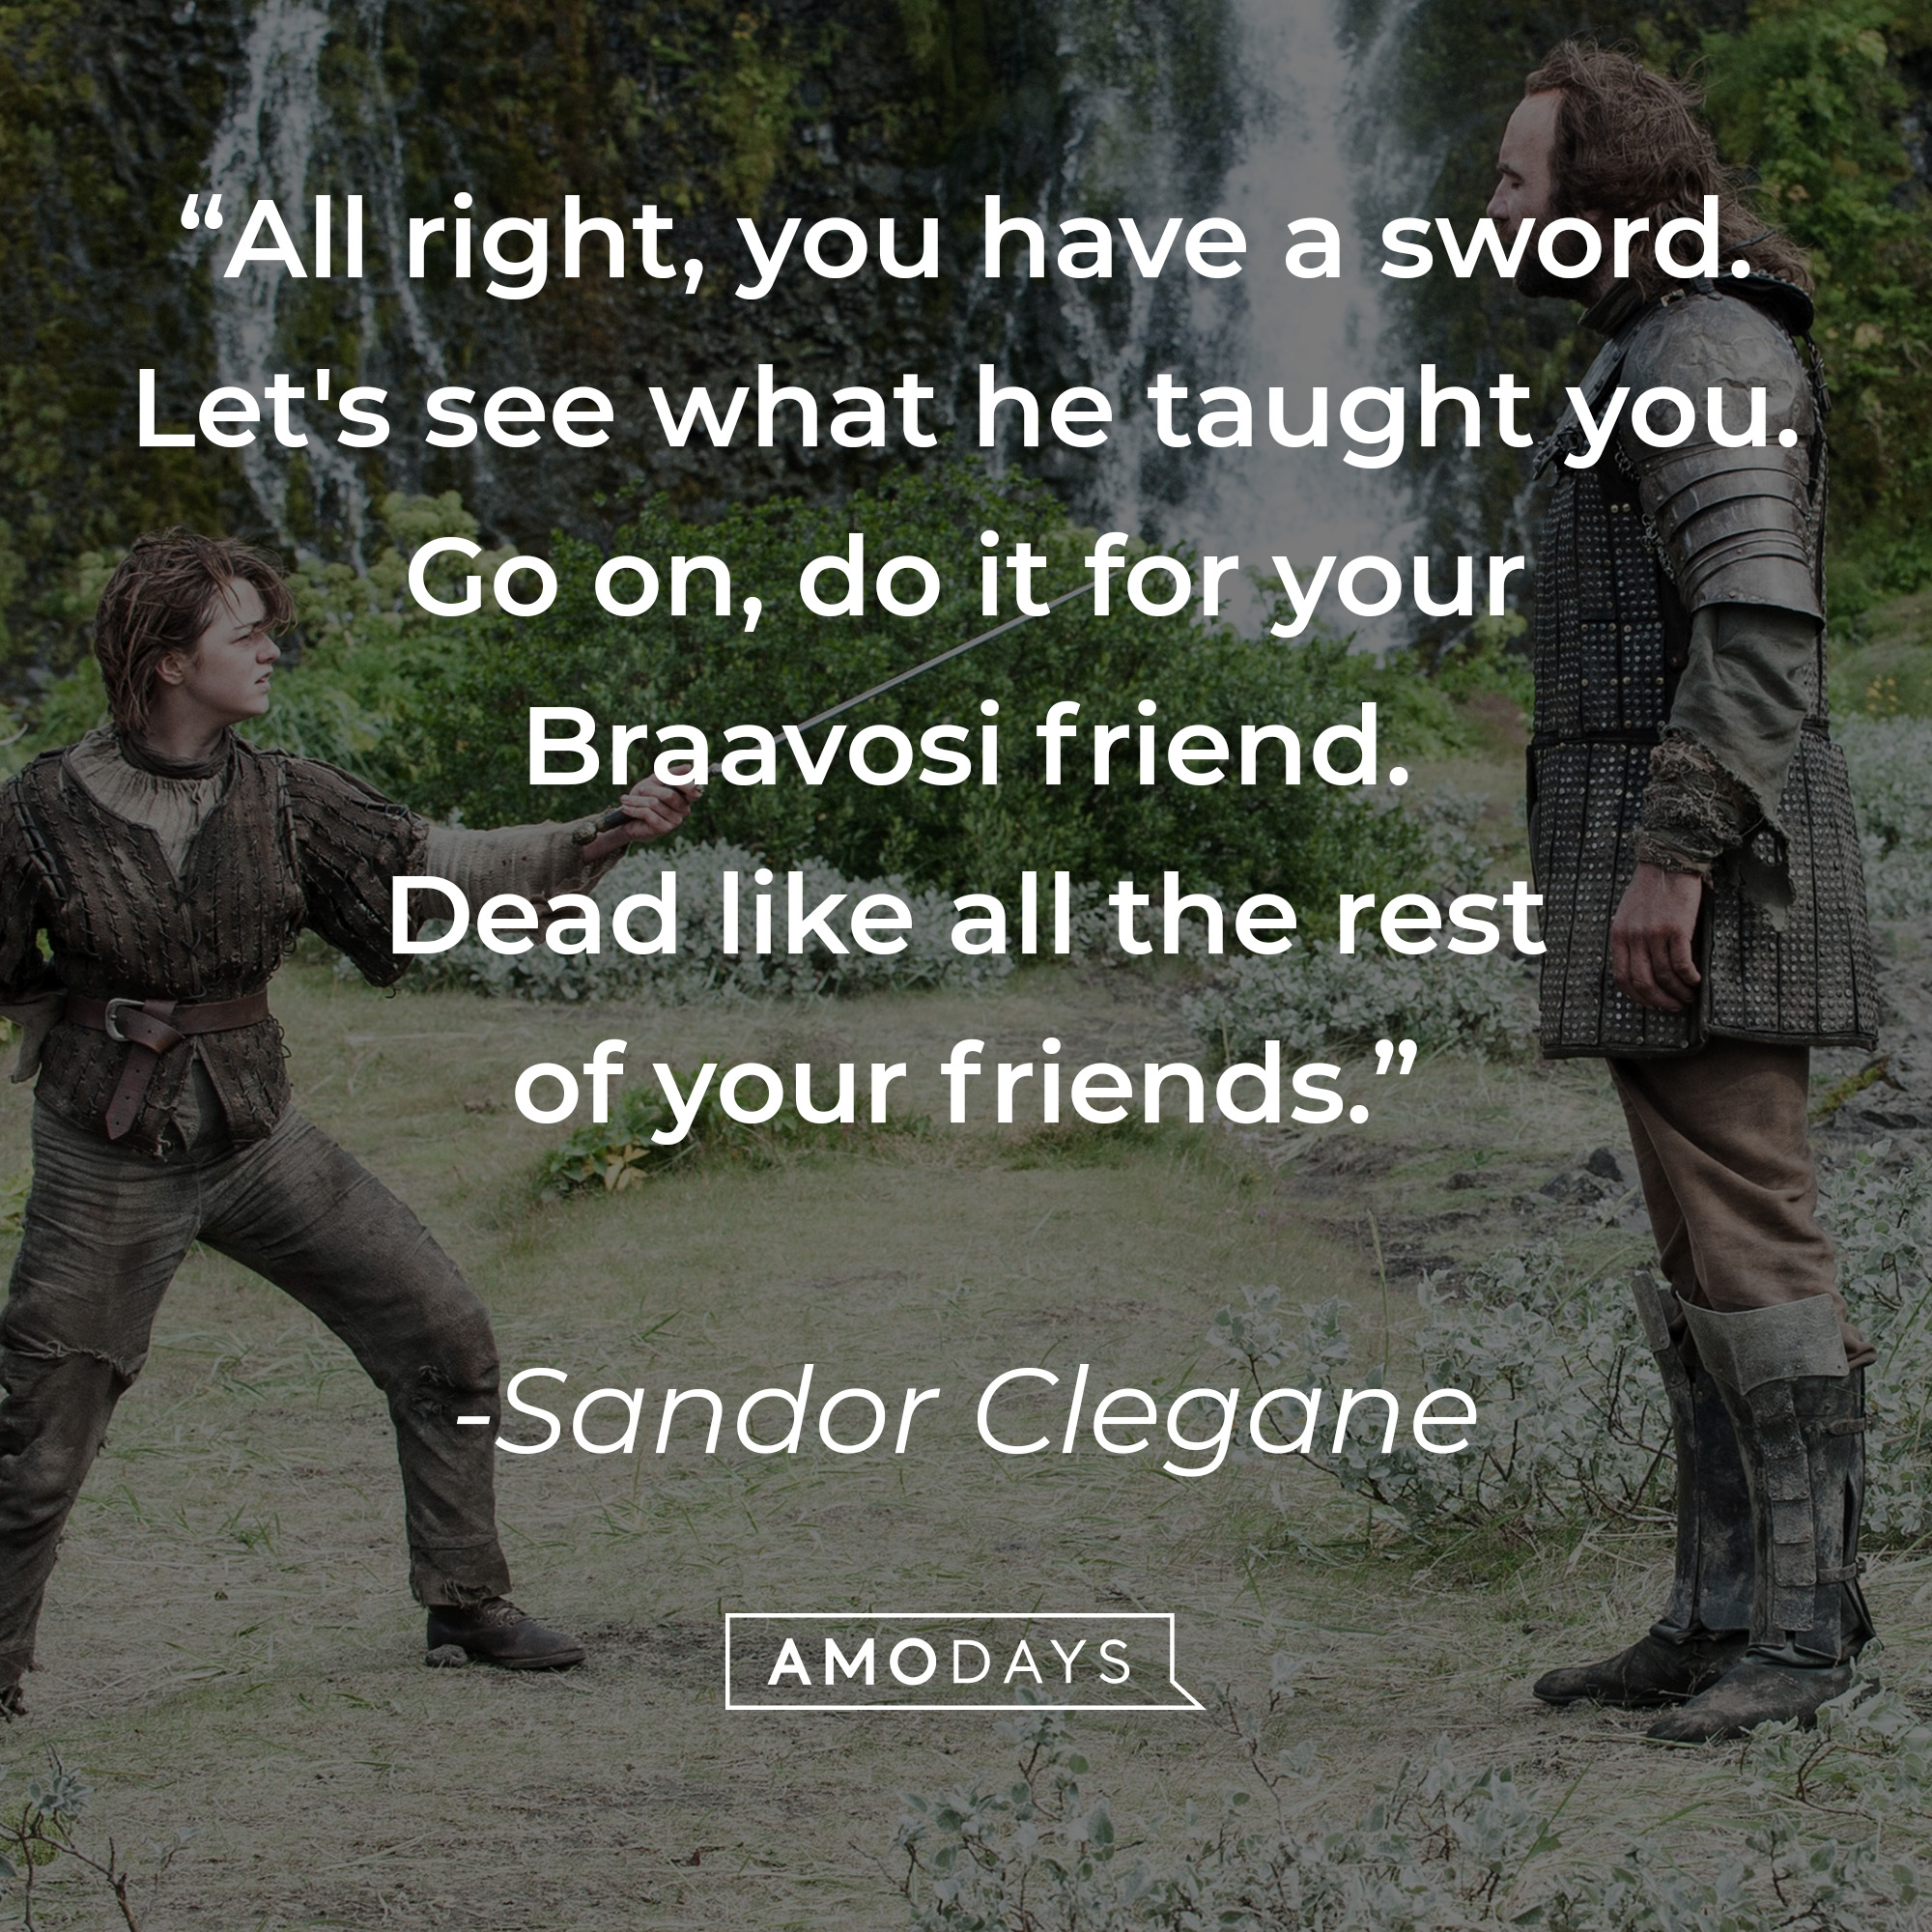 Sandor Clegane's quote: "All right, you have a sword. Let's see what he taught you. Go on, do it for your Braavosi friend. Dead like all the rest of your friends." | Source: facebook.com/GameOfThrones